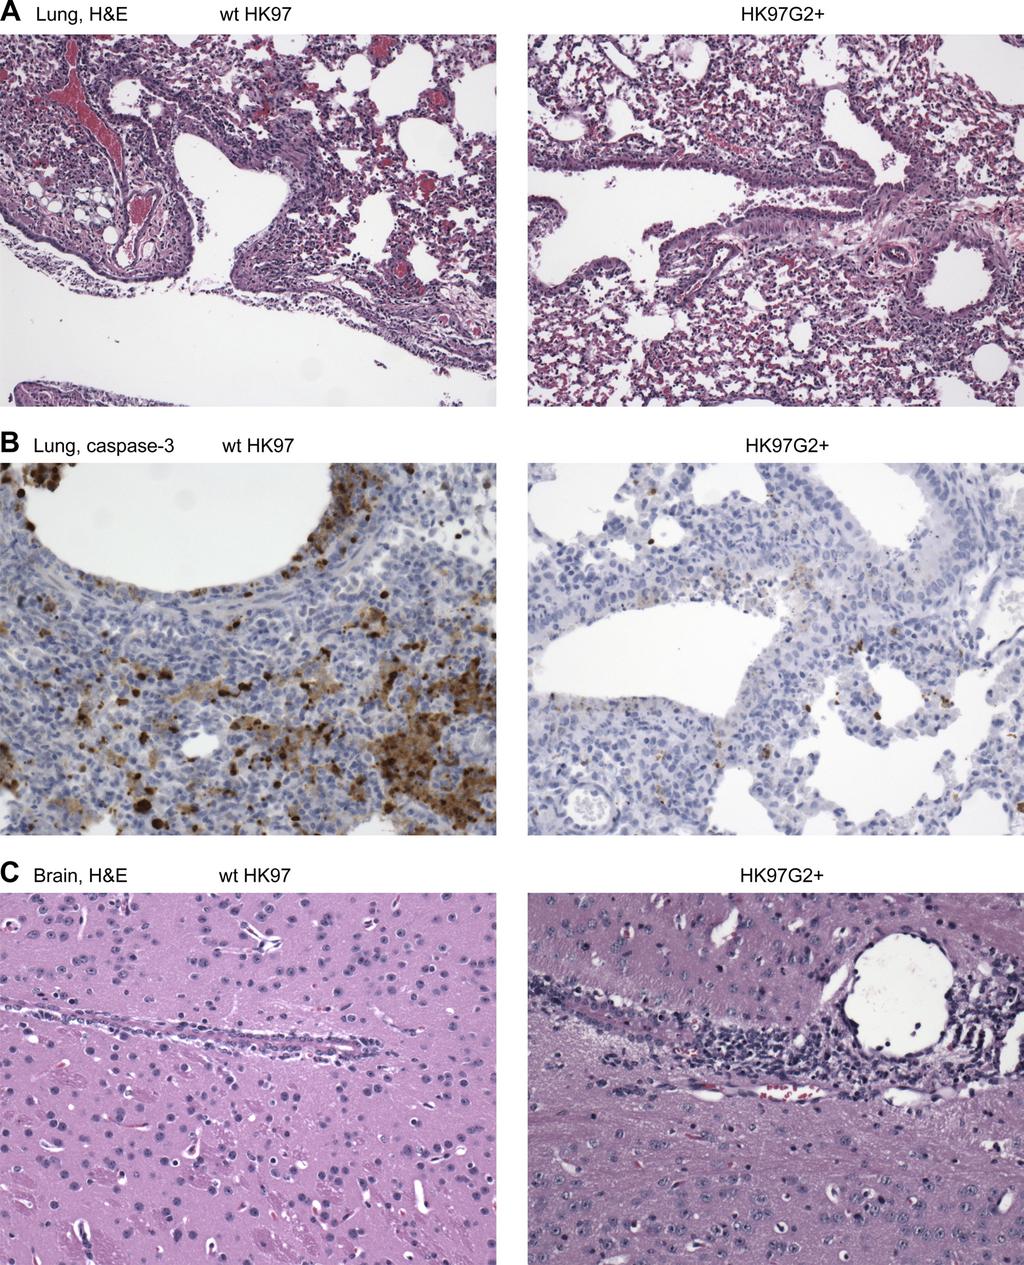 7052 SPESOCK ET AL. J. VIROL. FIG. 3. Histopathology after infection of mice with wt HK97 and HK97G2.